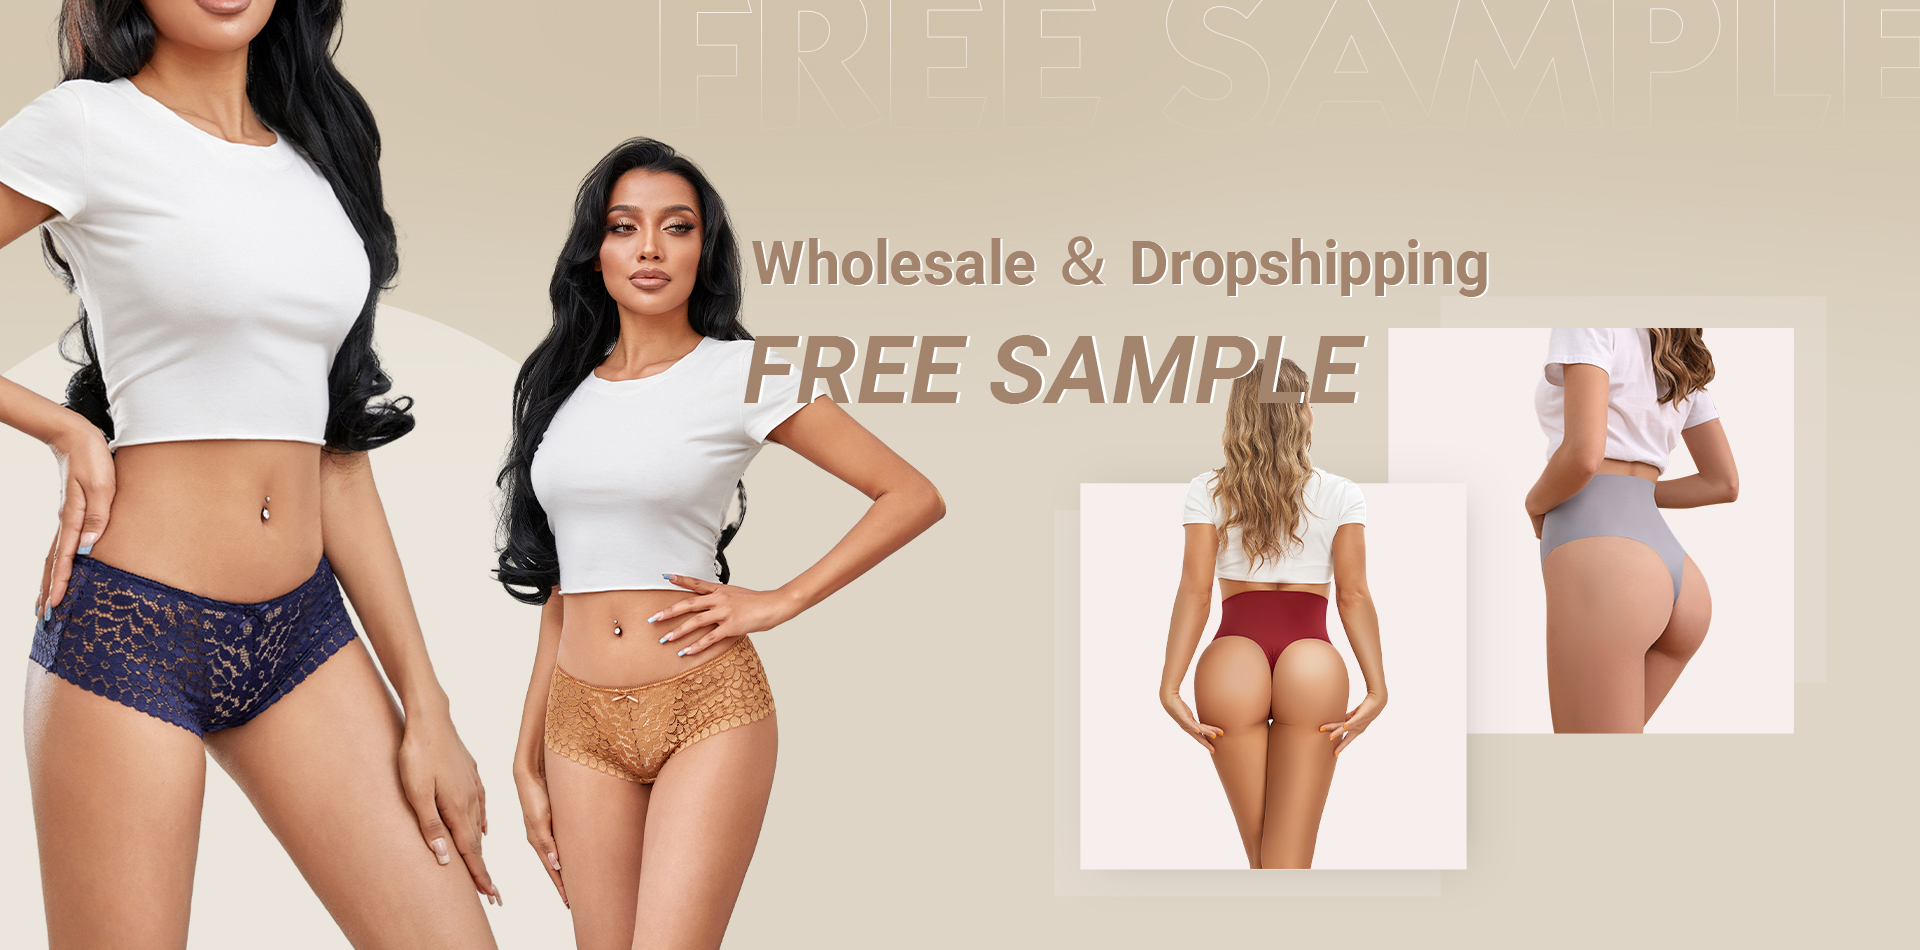 Wholesale & Dropshipping